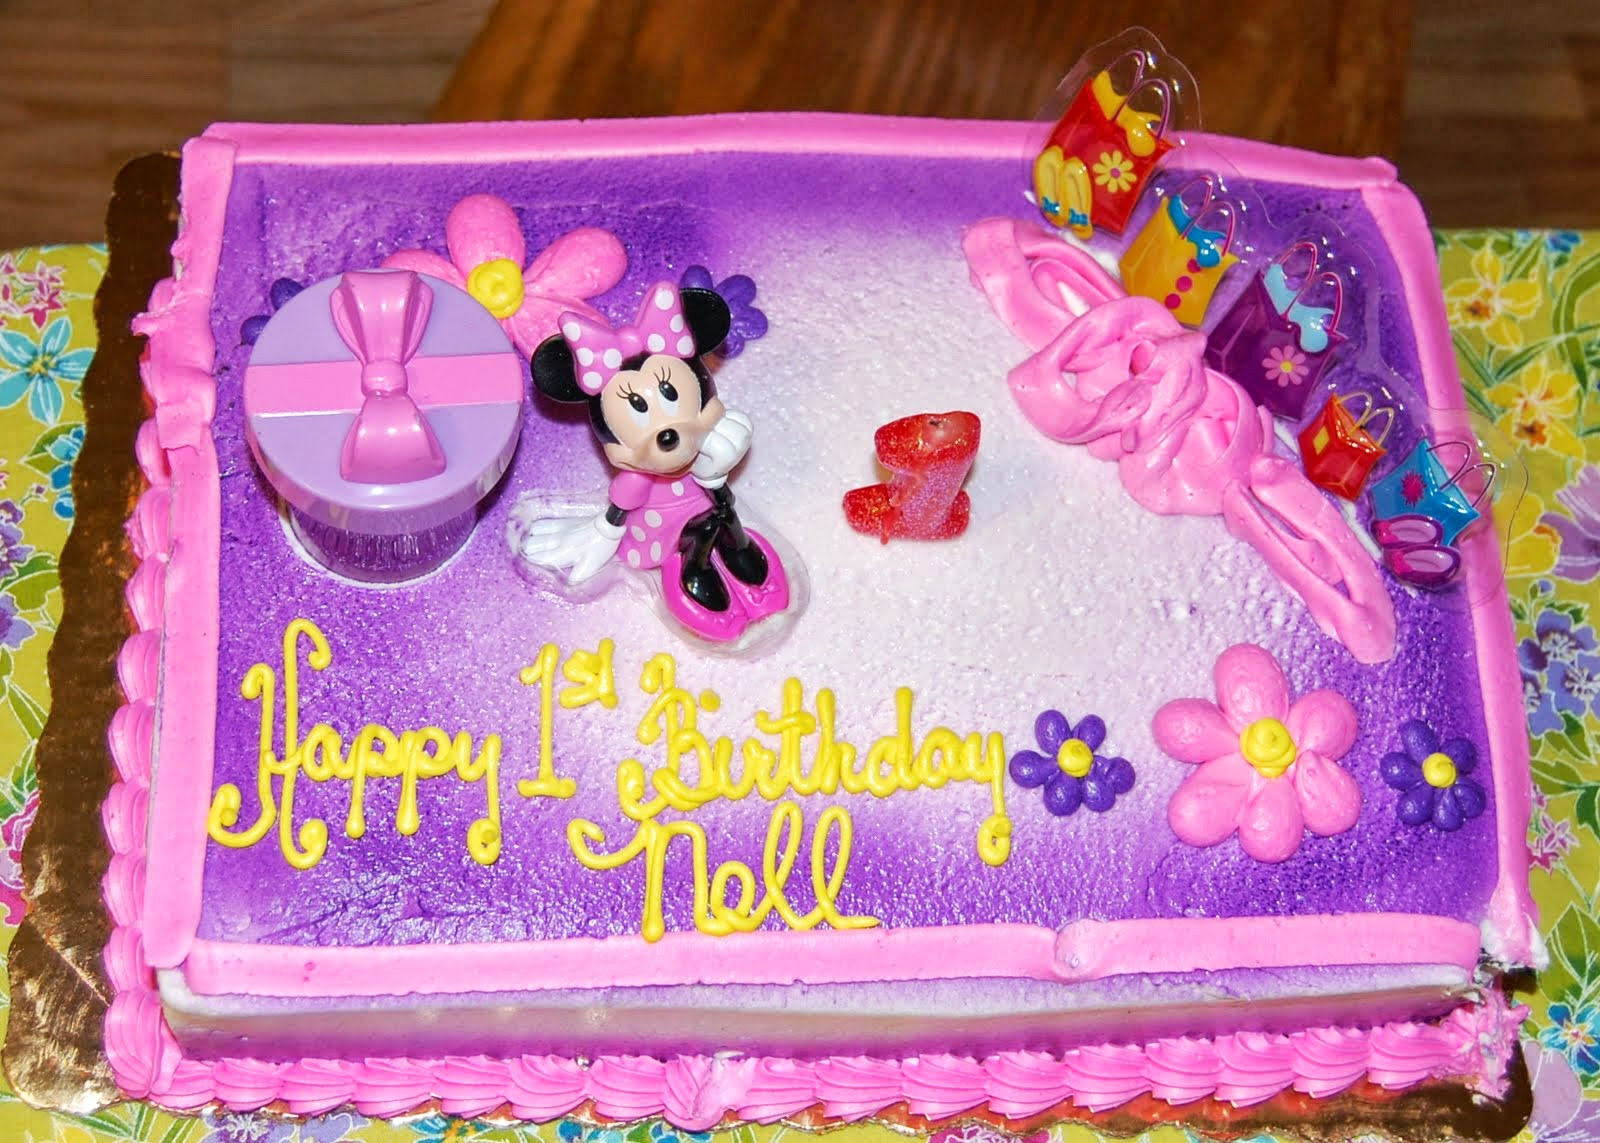 20 Of the Best Ideas for Birthday Cakes Publix - Home ...